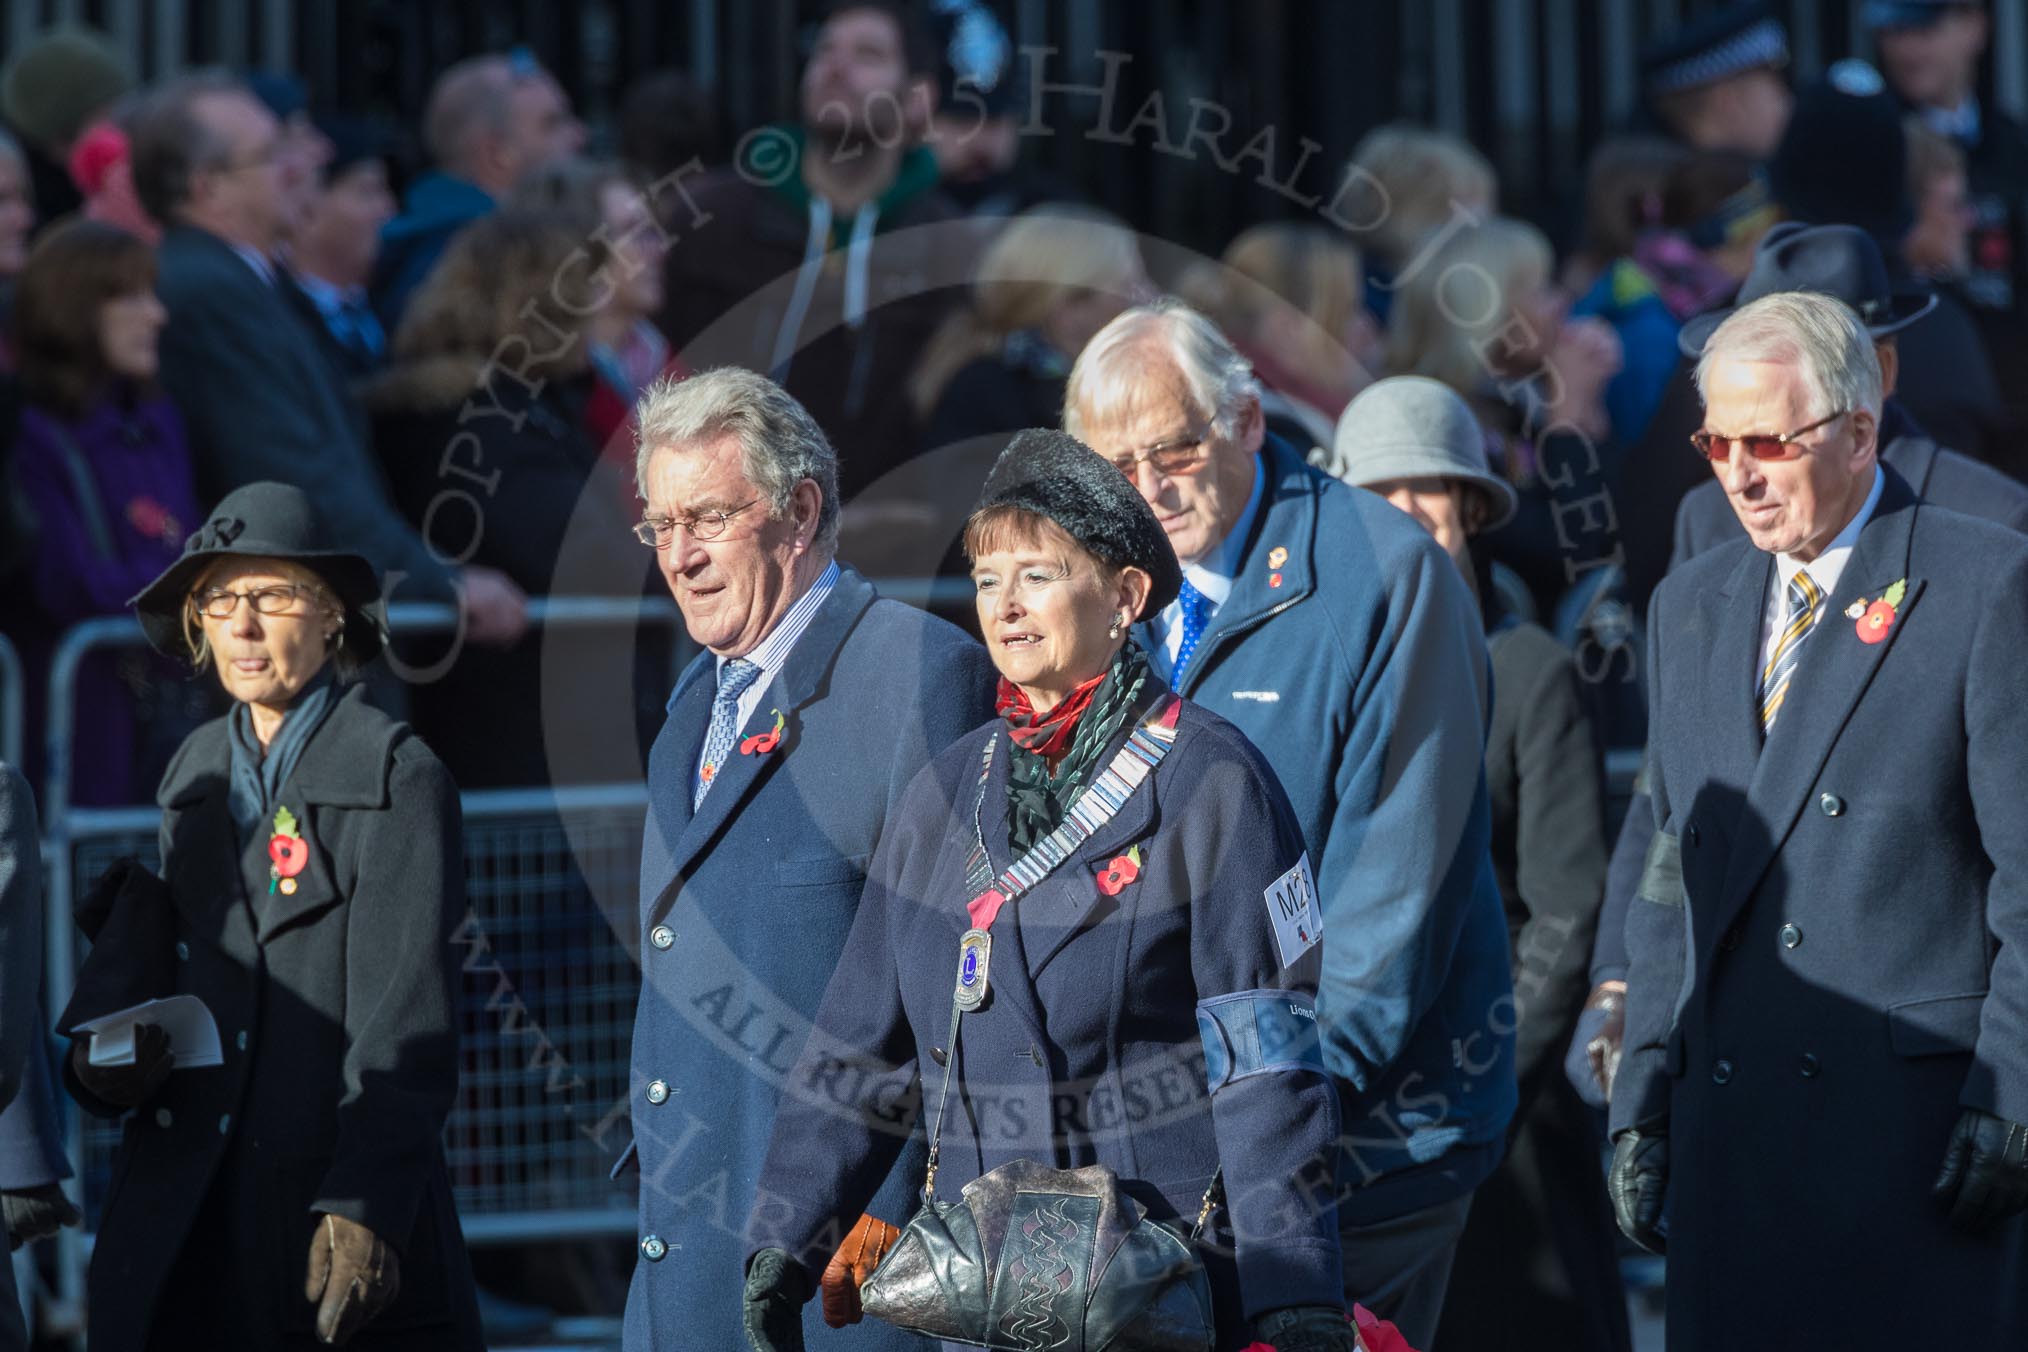 March Past, Remembrance Sunday at the Cenotaph 2016: M28 Lions Club International.
Cenotaph, Whitehall, London SW1,
London,
Greater London,
United Kingdom,
on 13 November 2016 at 13:17, image #2734